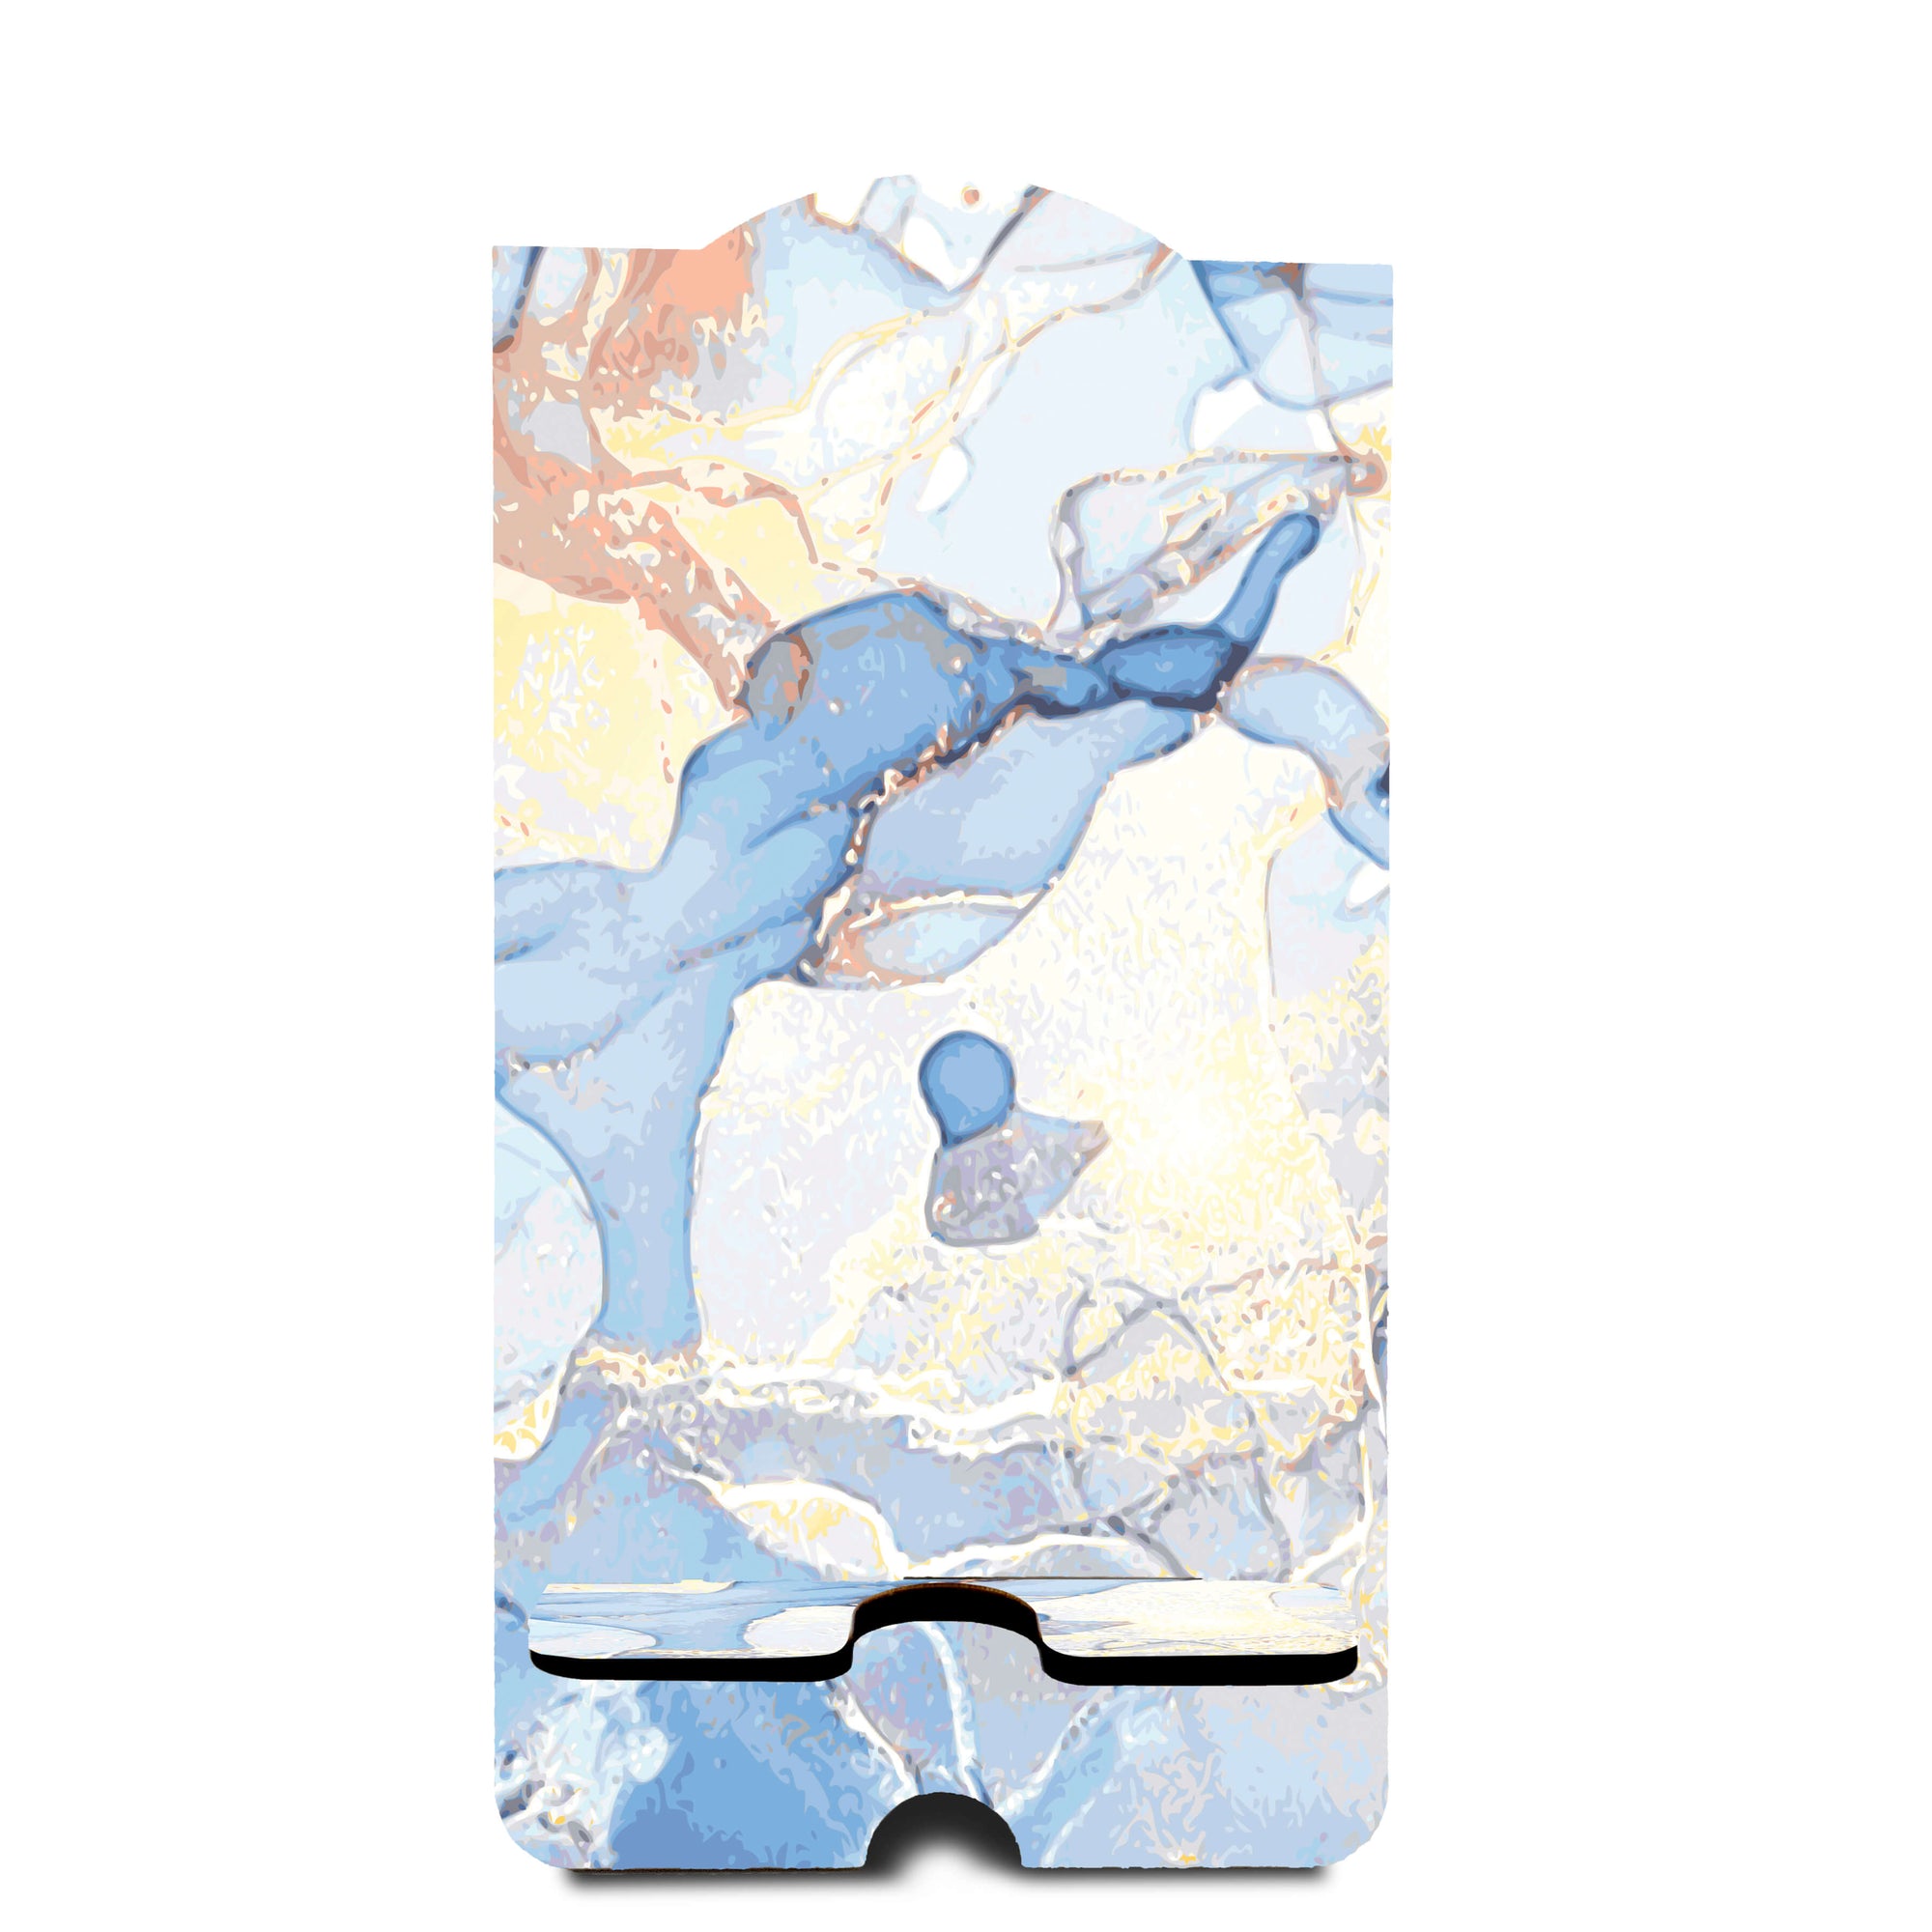 Classy Marble Mobile Stand-Image2-Image6